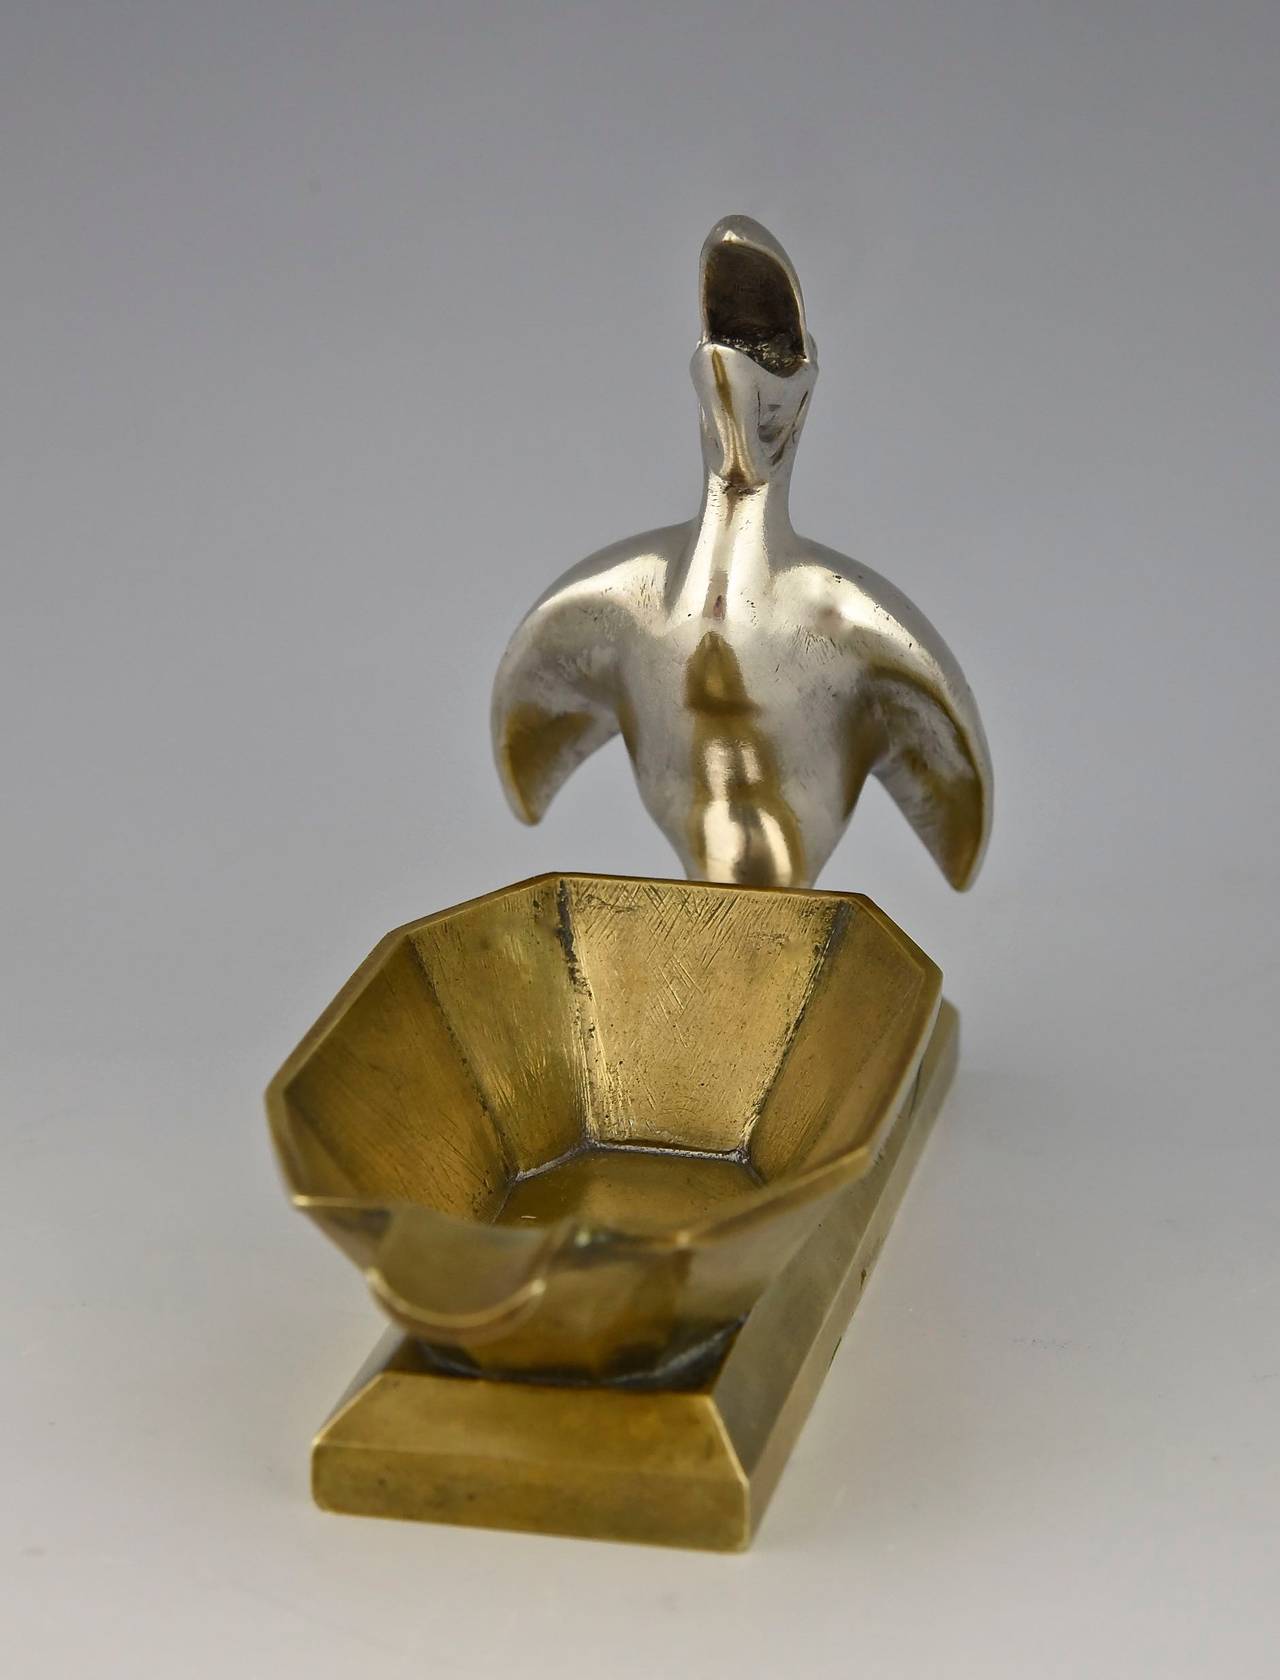 Silvered Art Deco Bonze Sculpture Ashtray with Pelican by Marionnet, France 1925